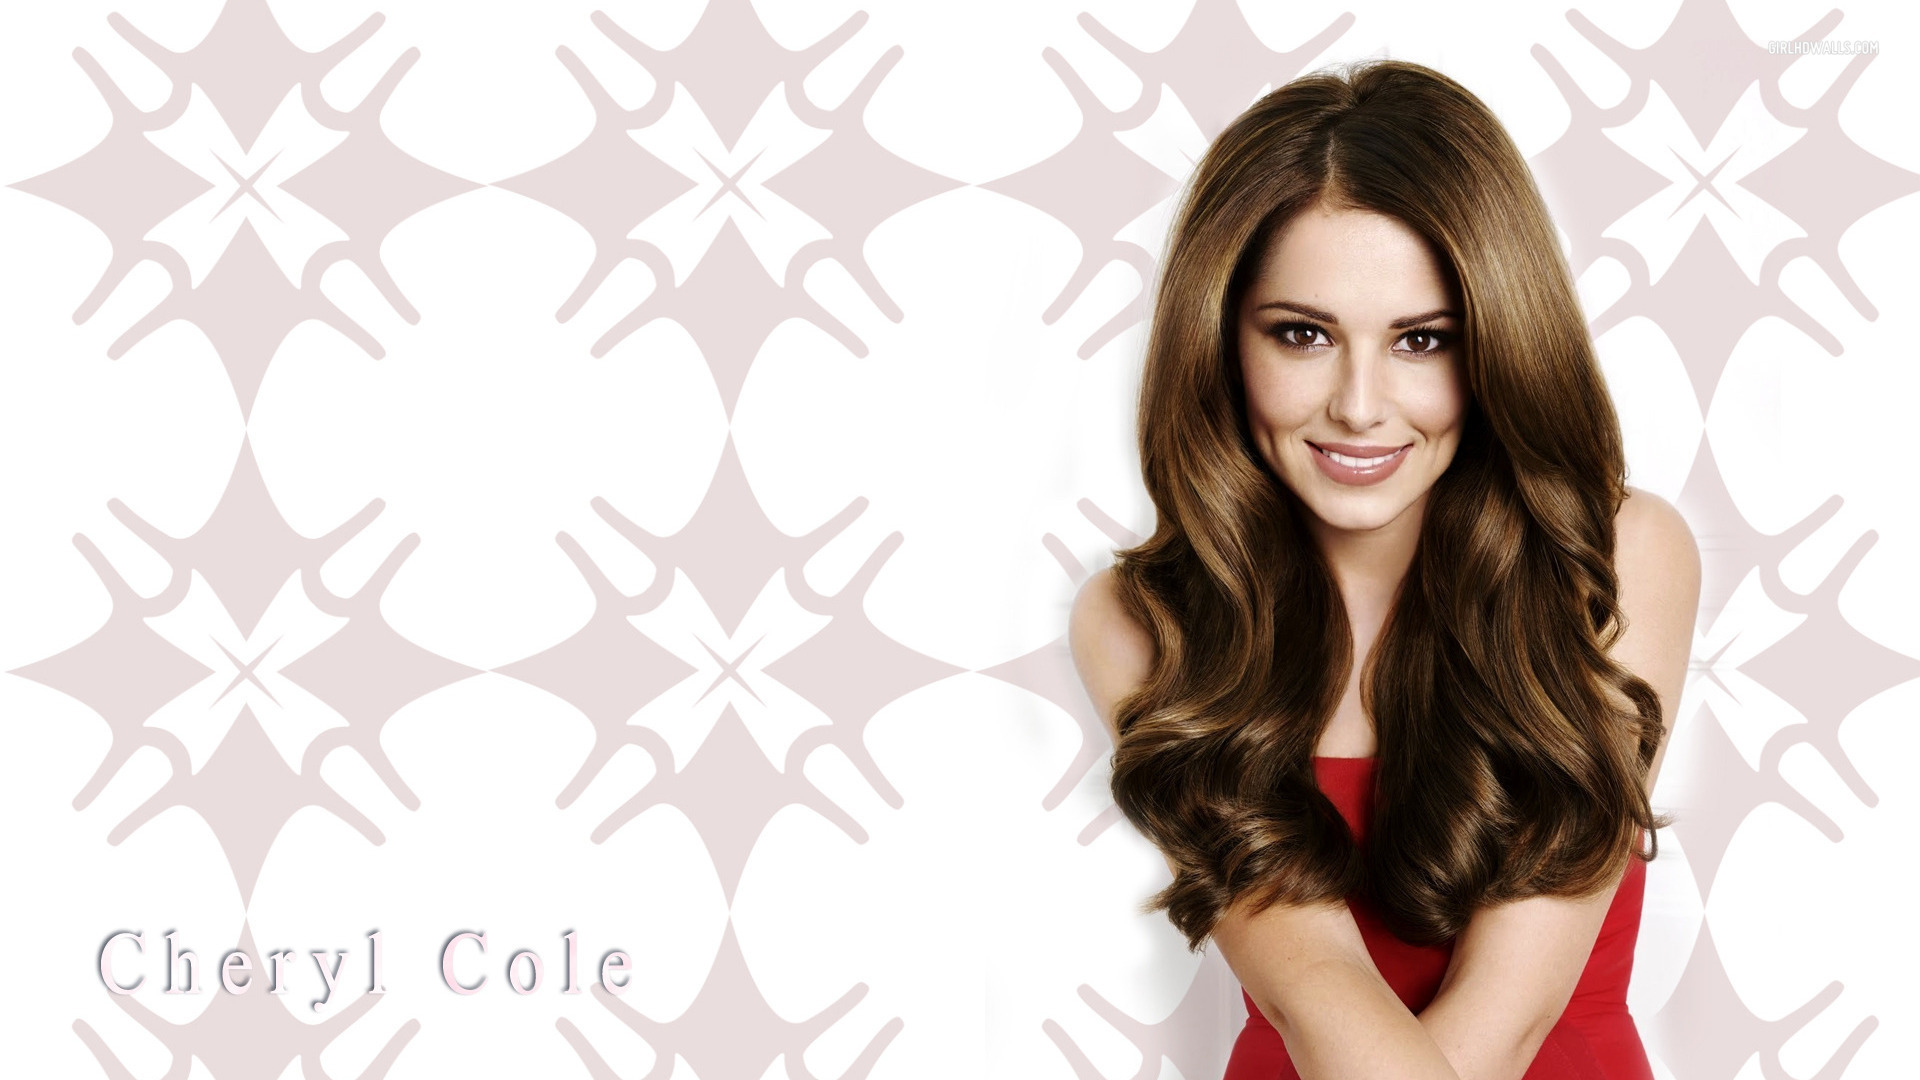 Cheryl Cole Wallpaper Image Photos Pictures Background